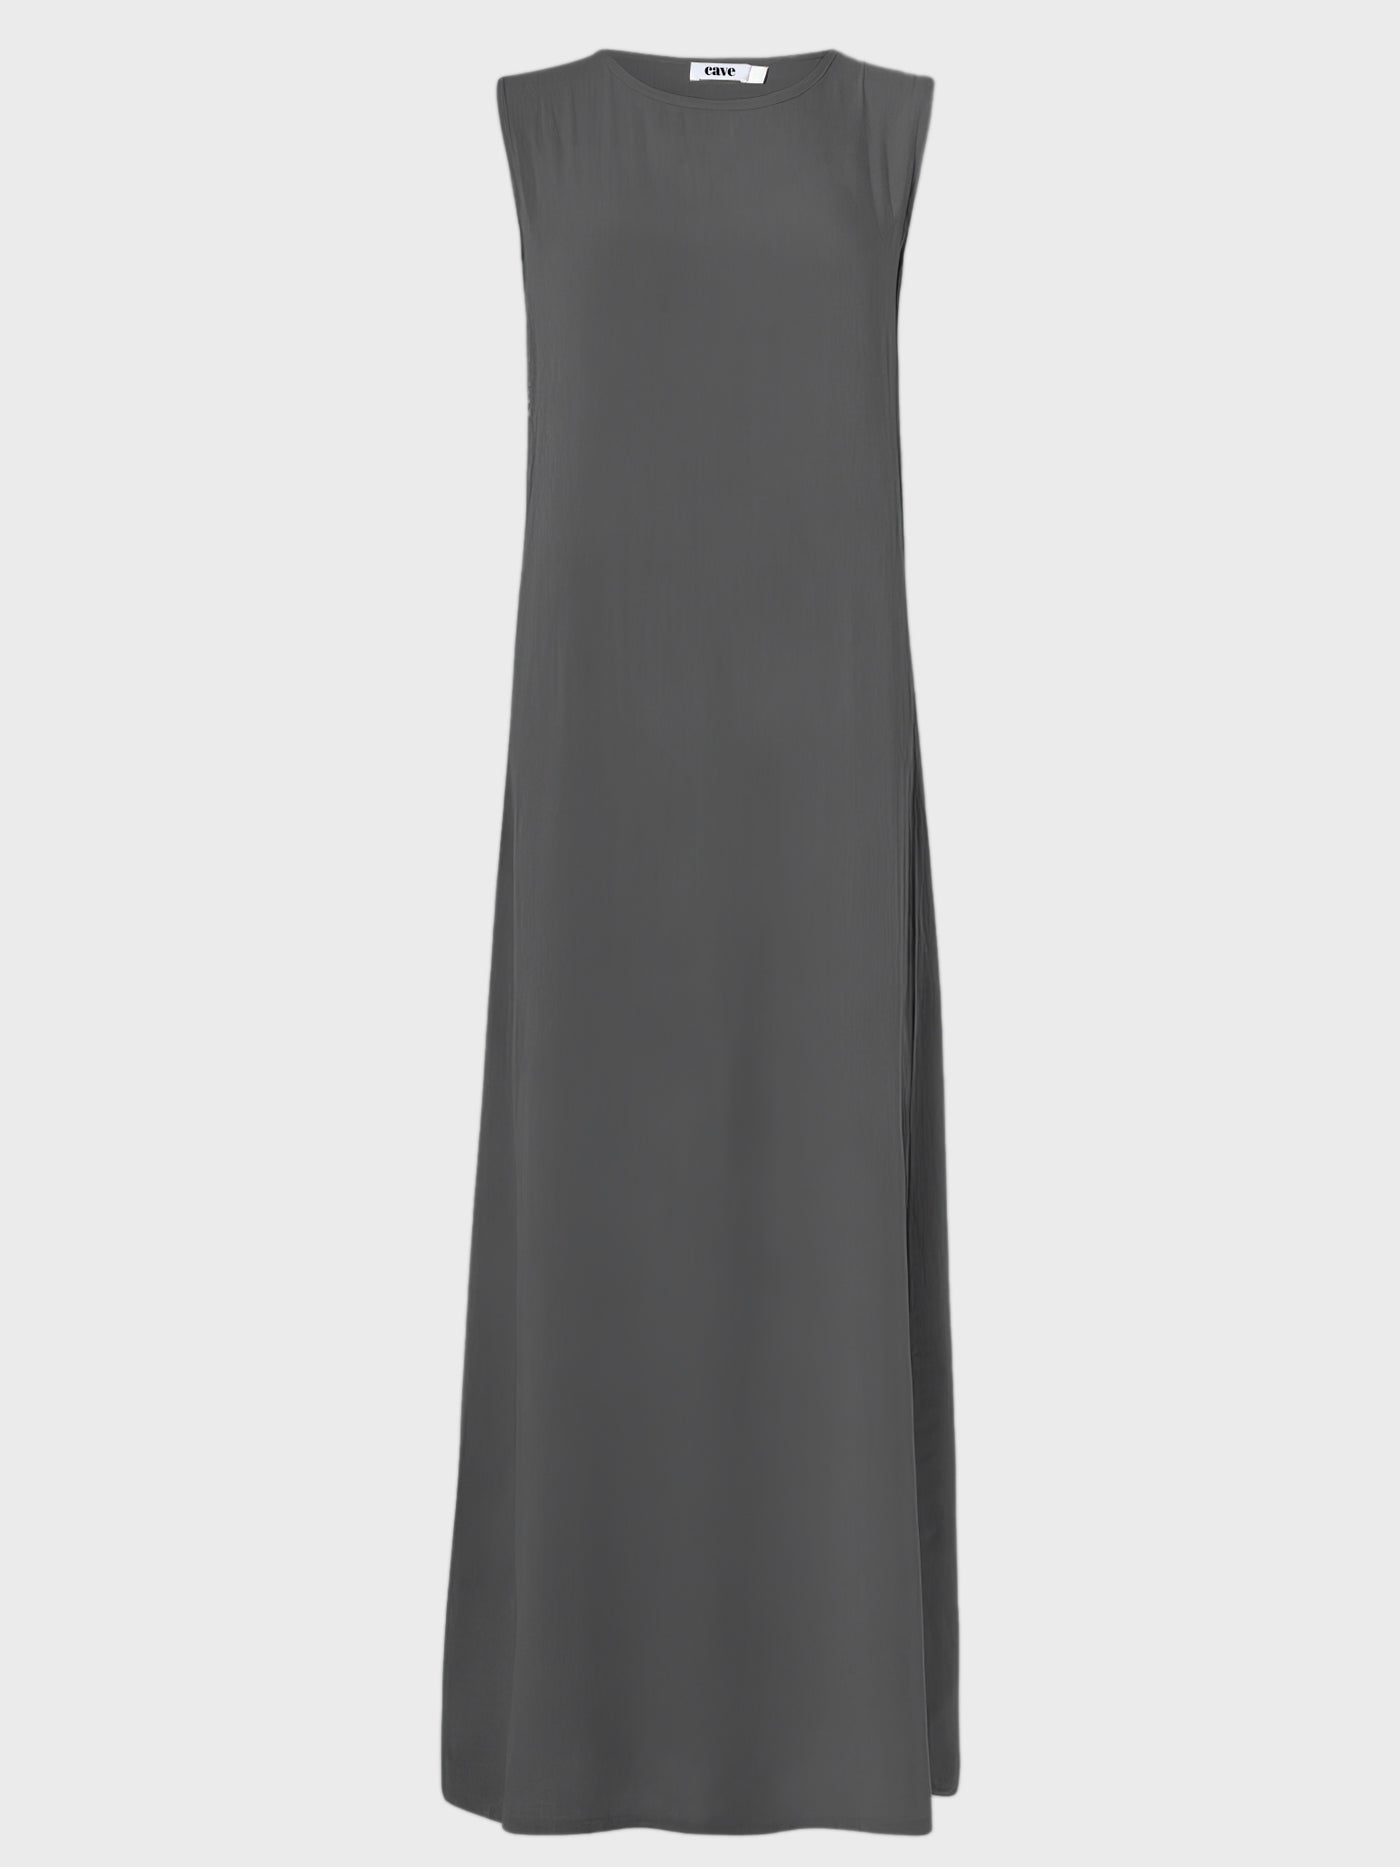 Charcoal Soft Touch Slip Dress